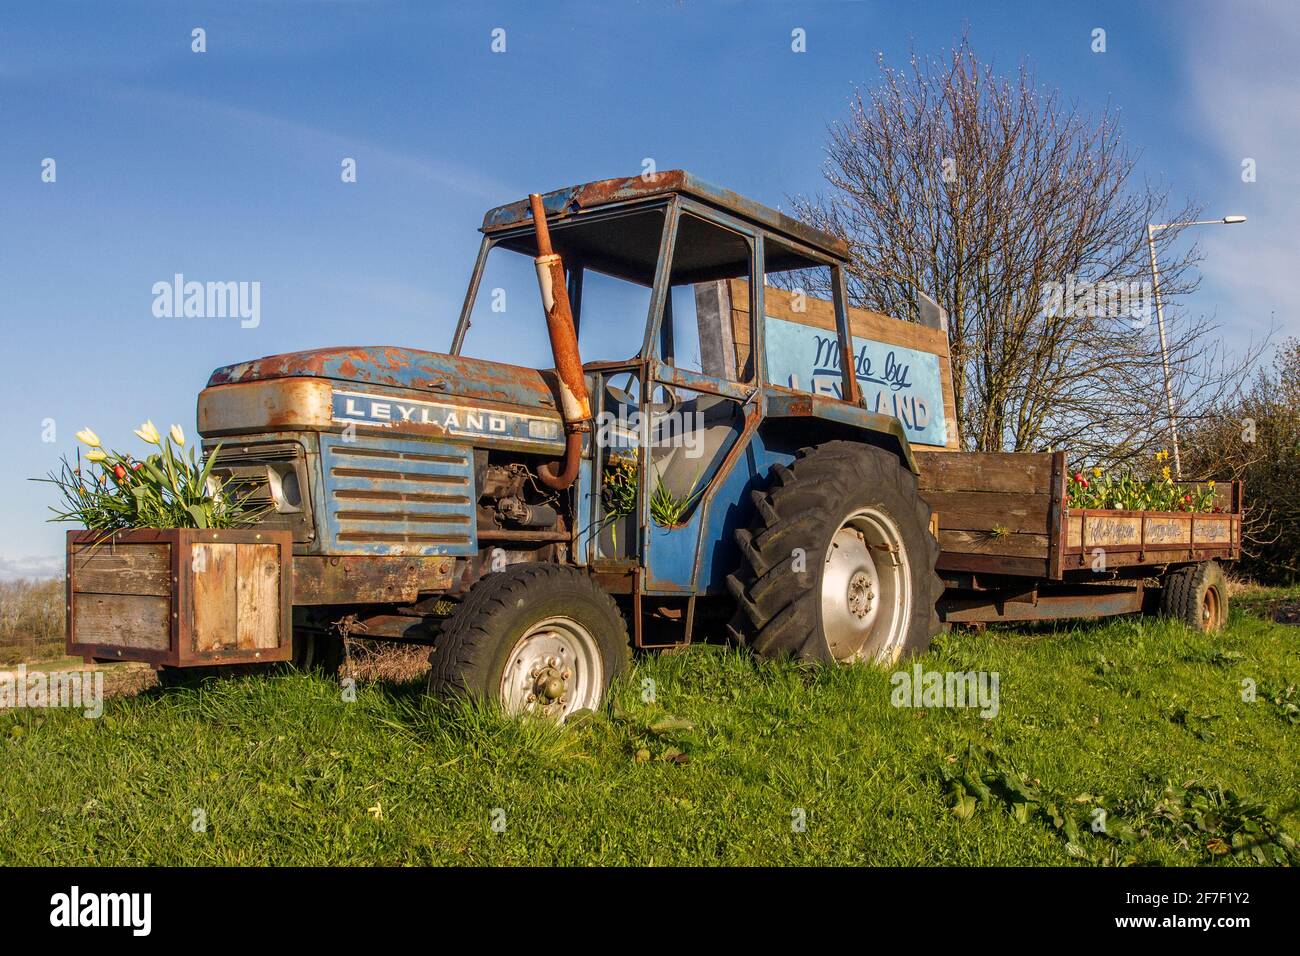 Vintage Leyland tractor in Lancashire UK. April, 2021. Blue skies on a bright sunny morning. Cold frosty start for spring bulbs flowering in a decorated Leyland 245 2.5Ltr 3 cyl diesel tractor known locally as William.  The vintage tractor was installed in 2016. The two-tone vehicle is pulling a trailer filled with flowers. Credit; MediaWorldImages/AlamyLiveNews. Stock Photo